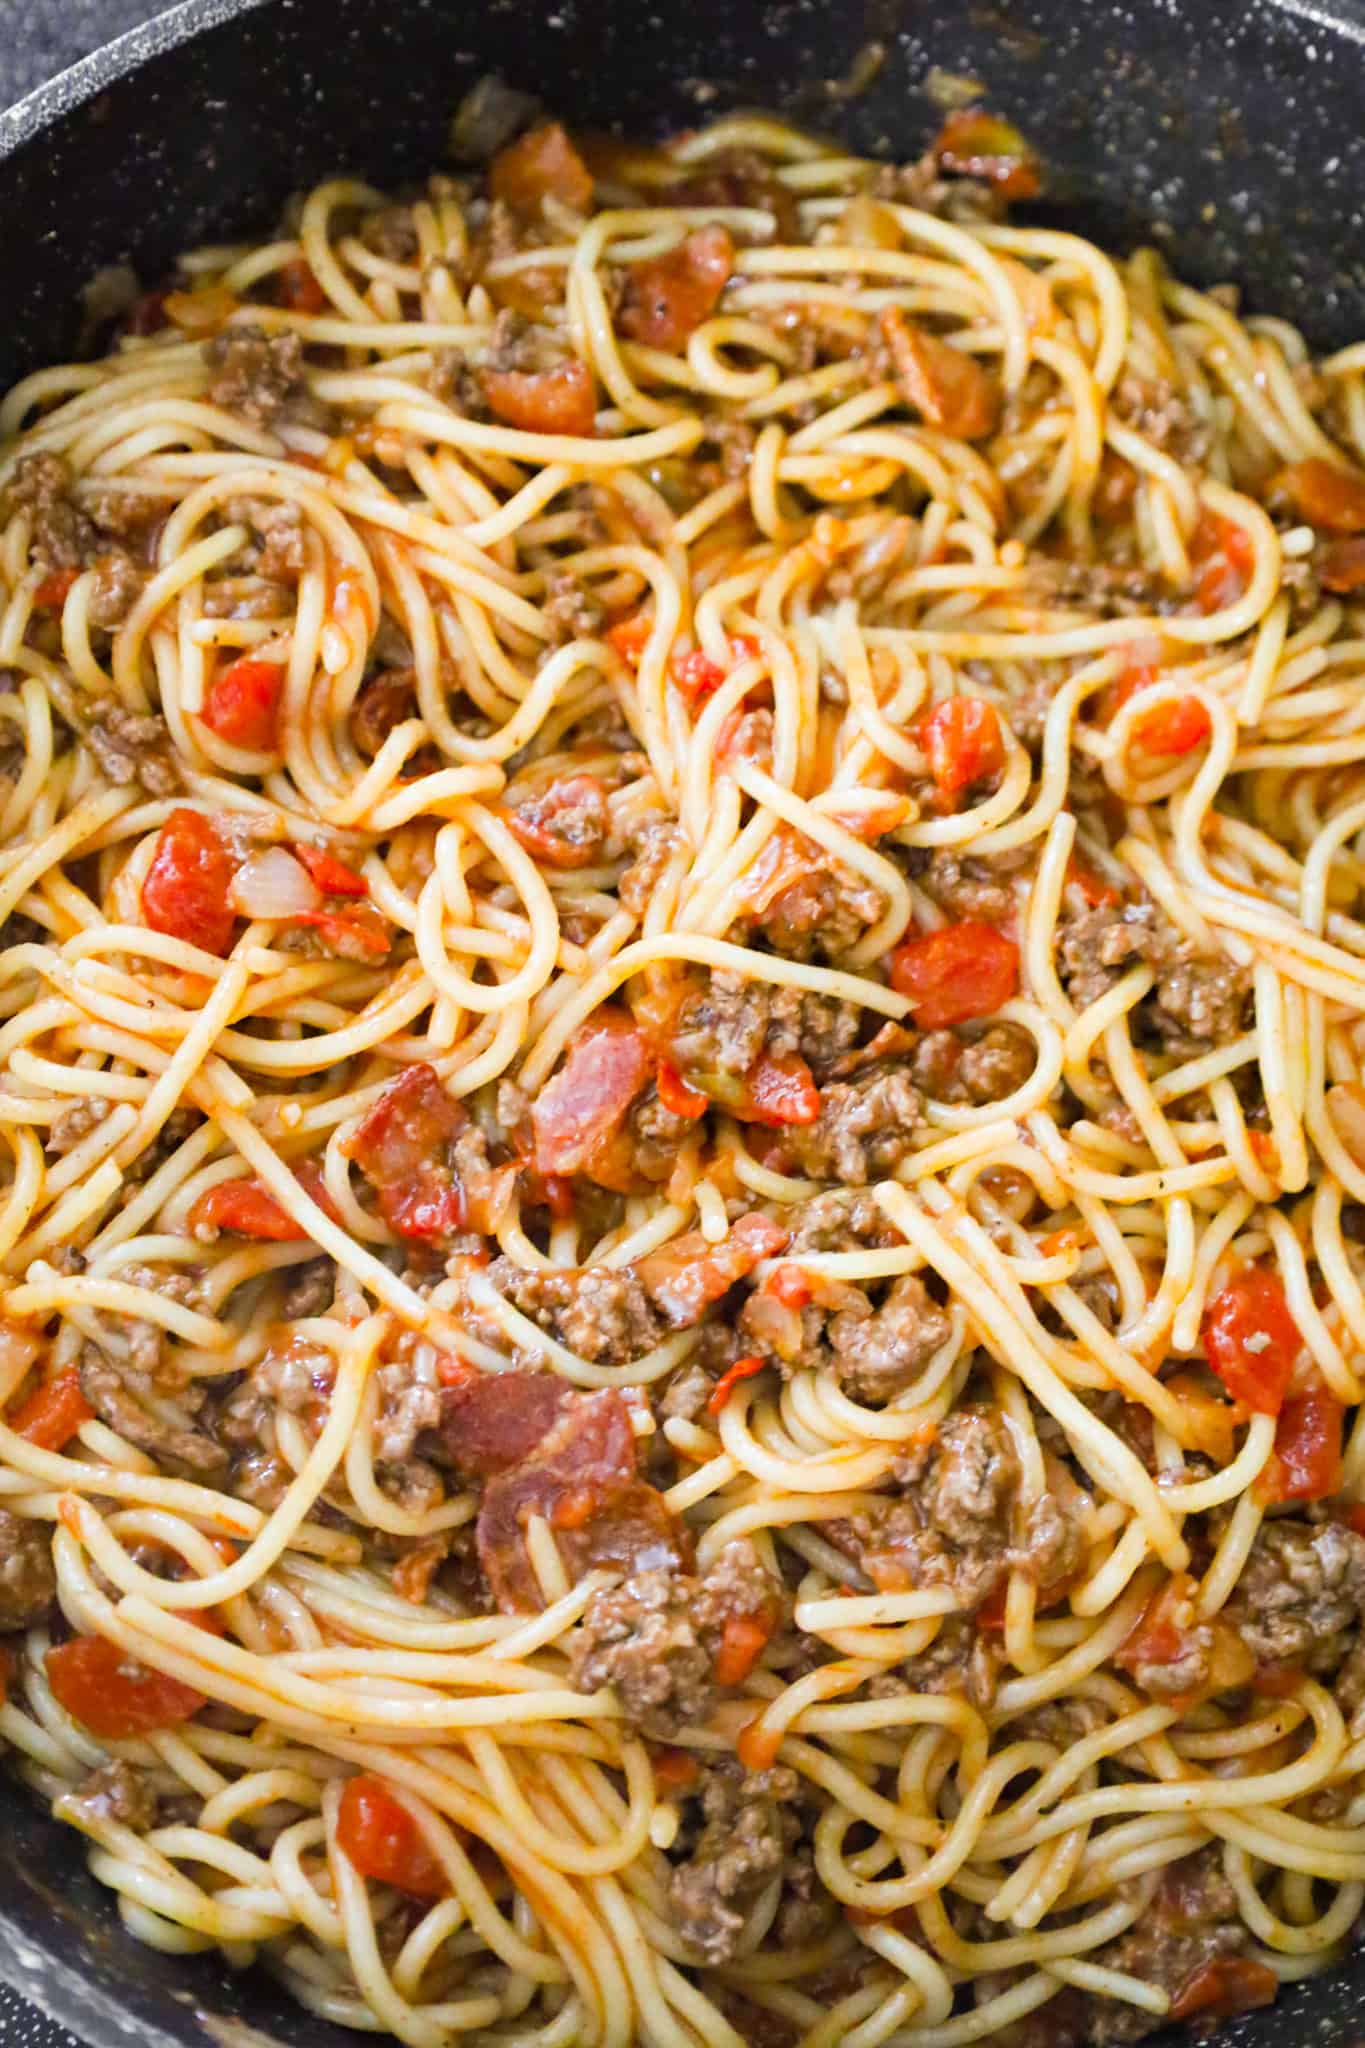 spaghetti and ground beef mixture in a skillet